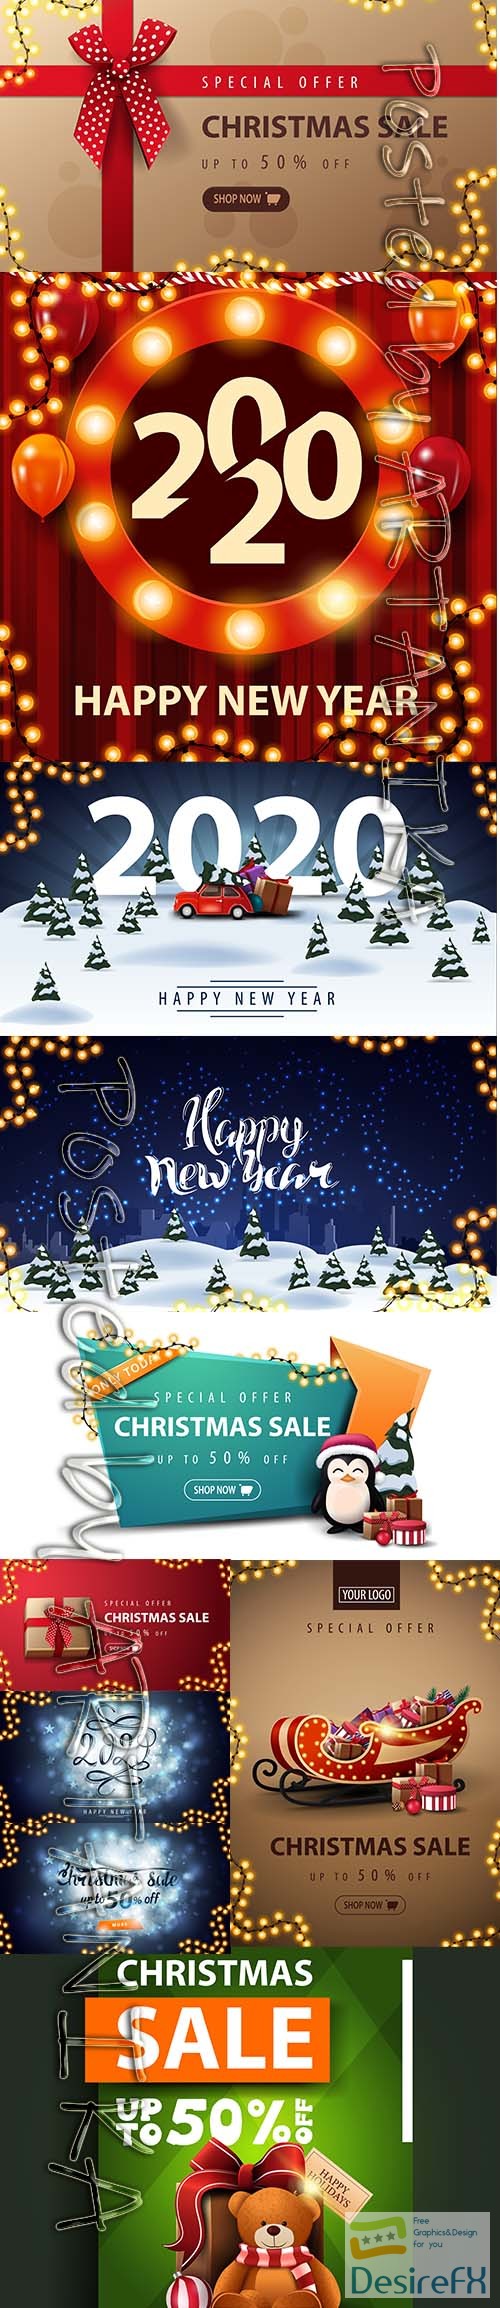 Christmas Sale Discount Banner and Illustrations Vector Set Vol 2